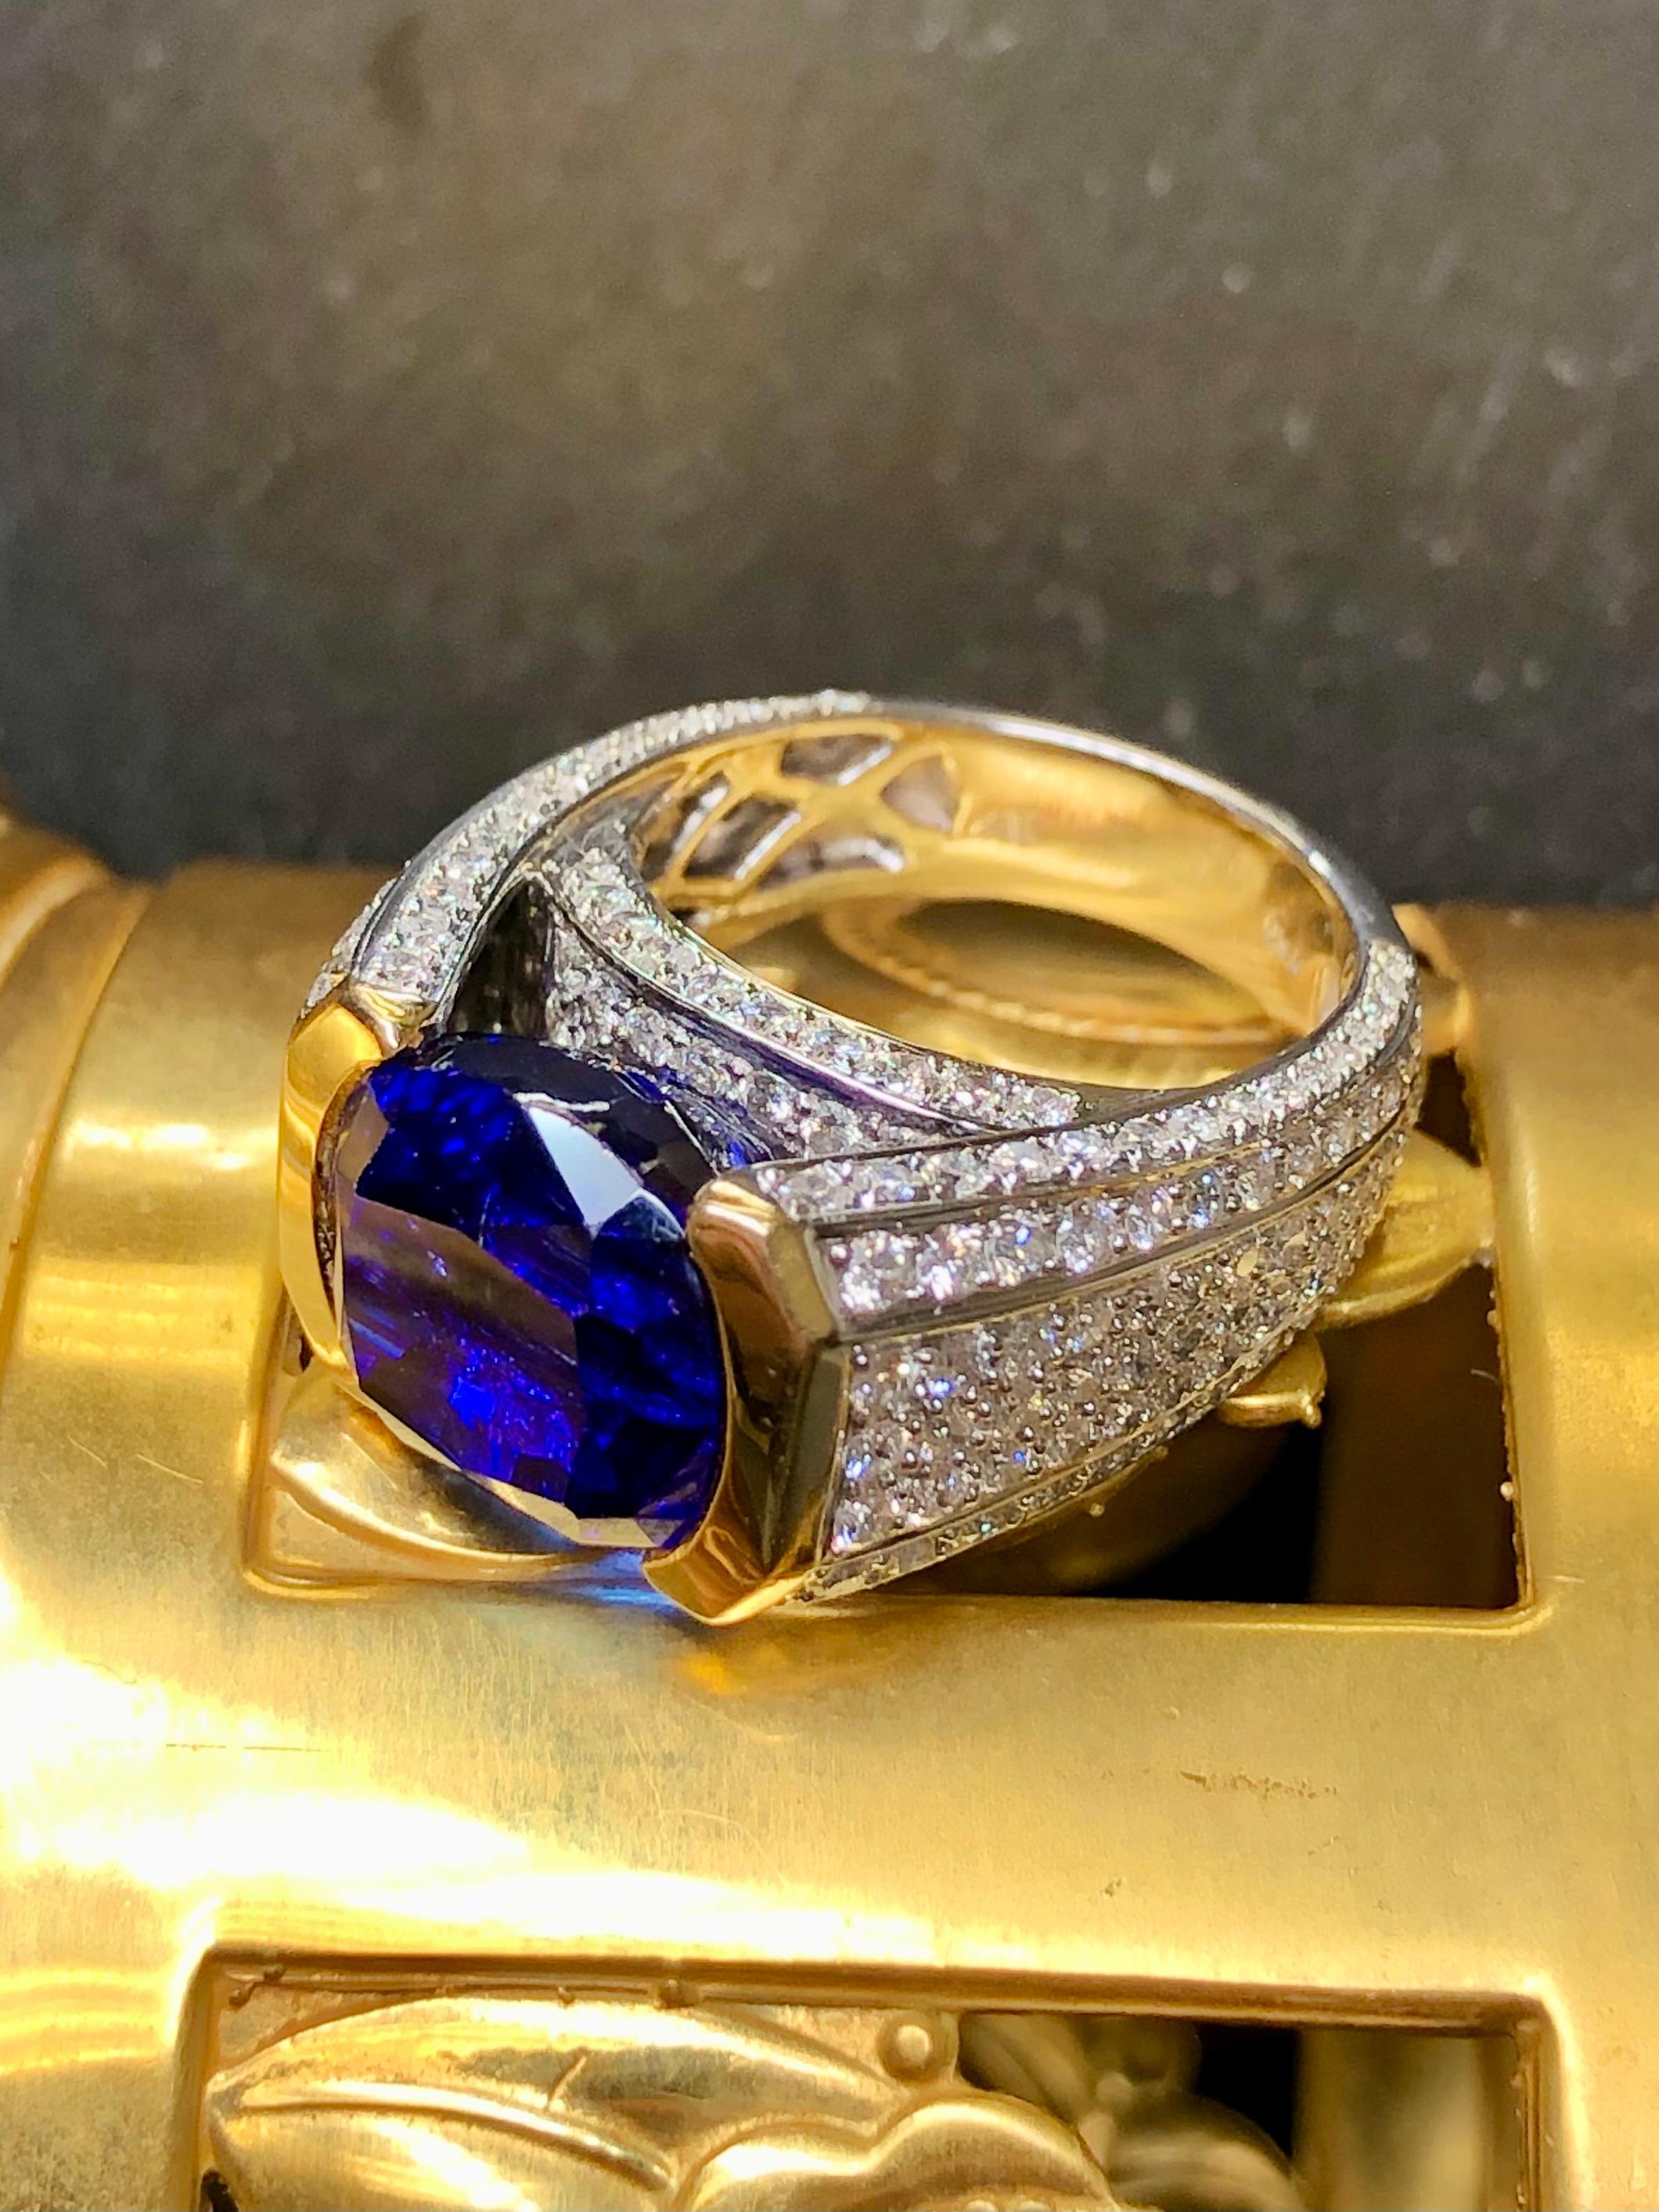 A substantial and well made cocktail ring that is surely to become your new showstopper piece! It is done in 18K white and yellow gold and centered by an approximately 10.25ct tanzanite (11.60mm x 11.30mm x 9mm) with another 3cttw in G-H color Vs1-2